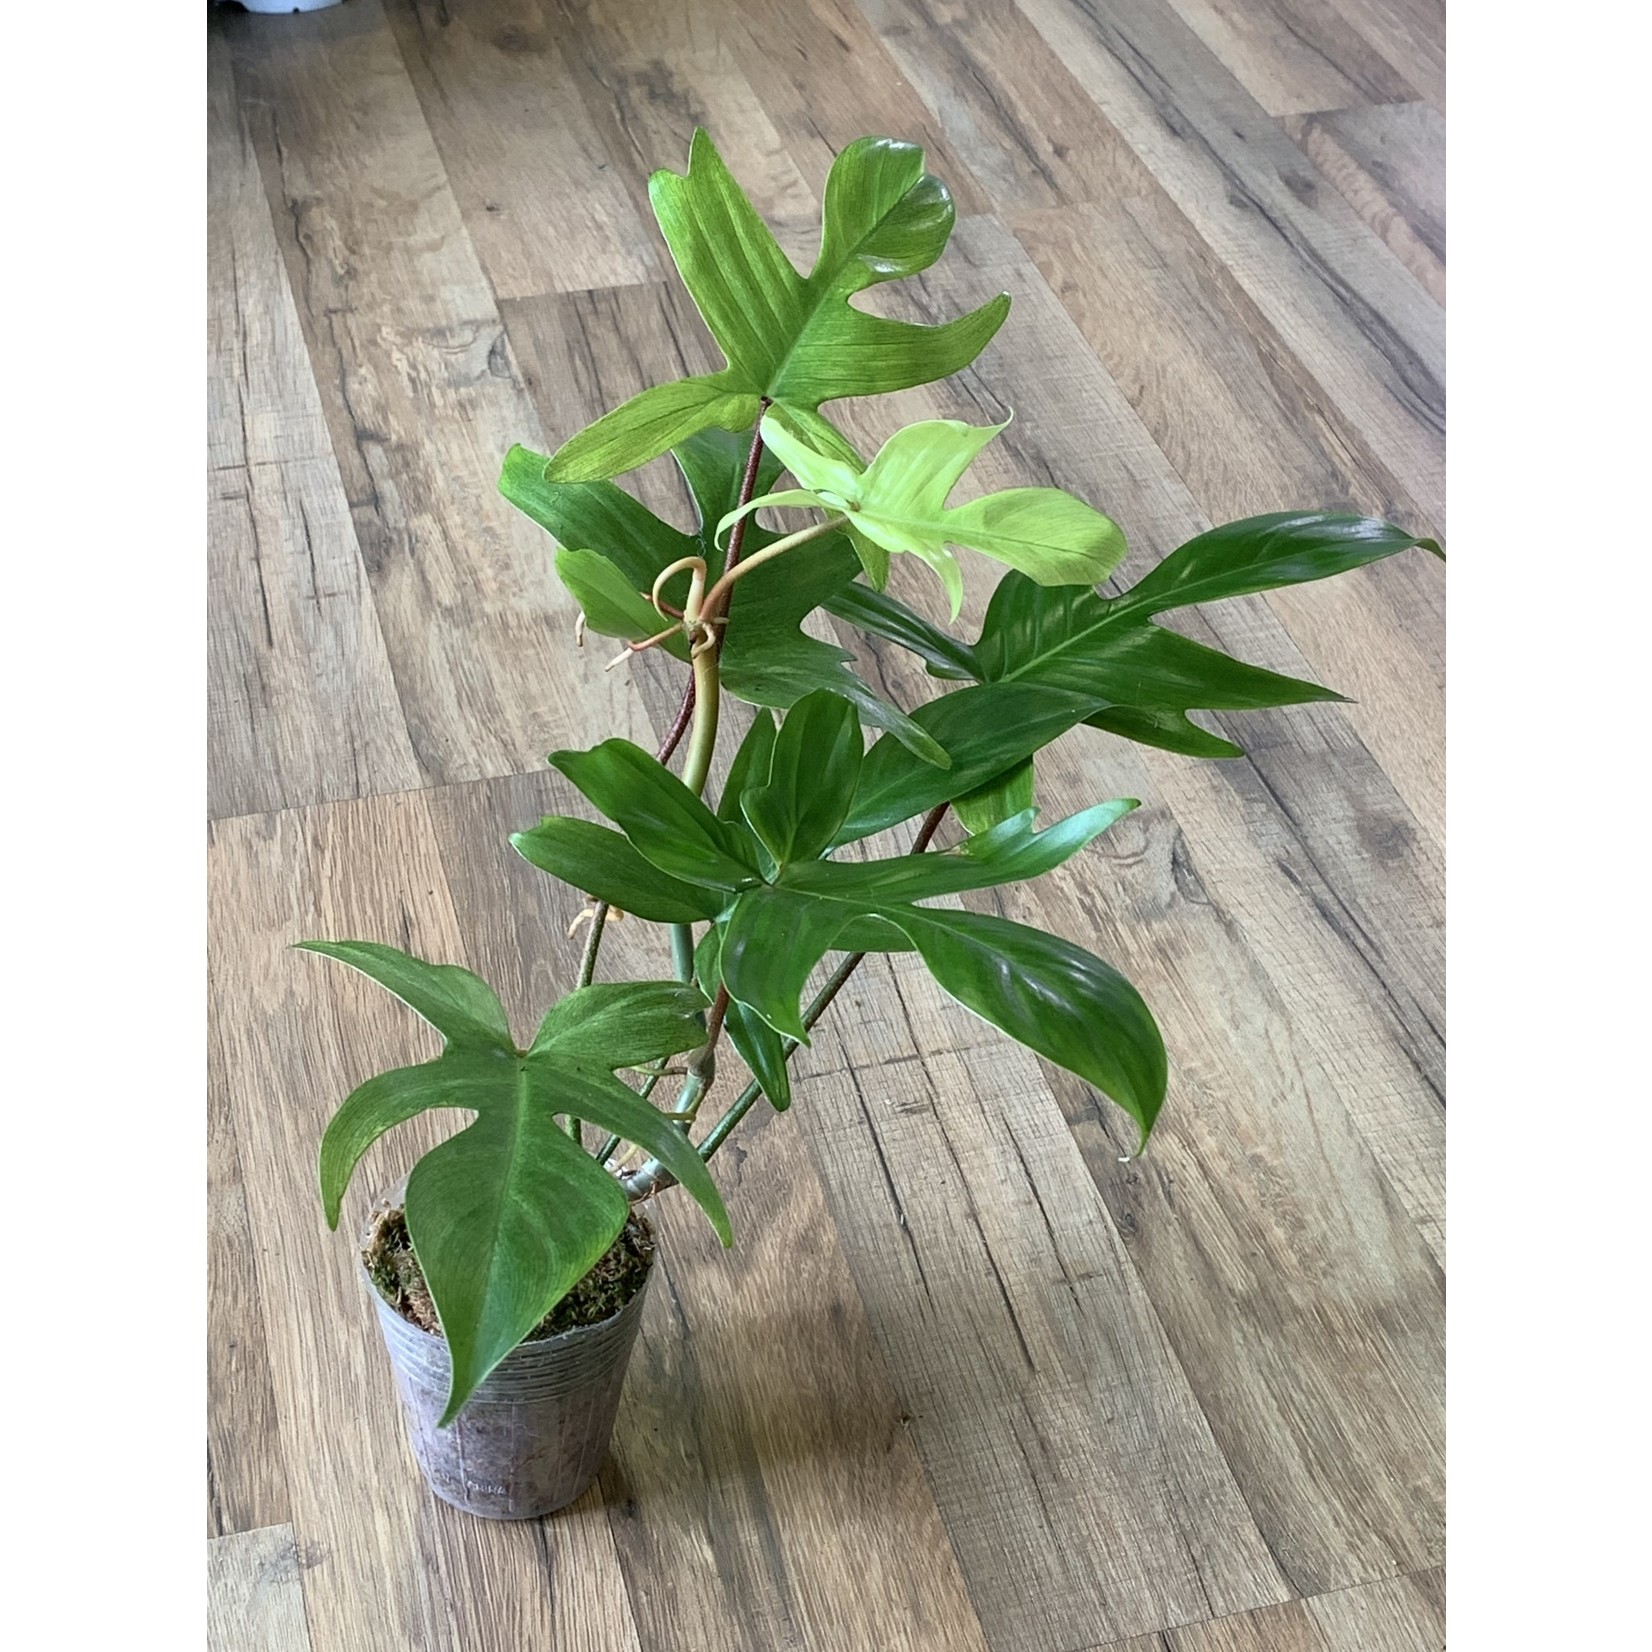 Philodendron 'Florida Ghost'